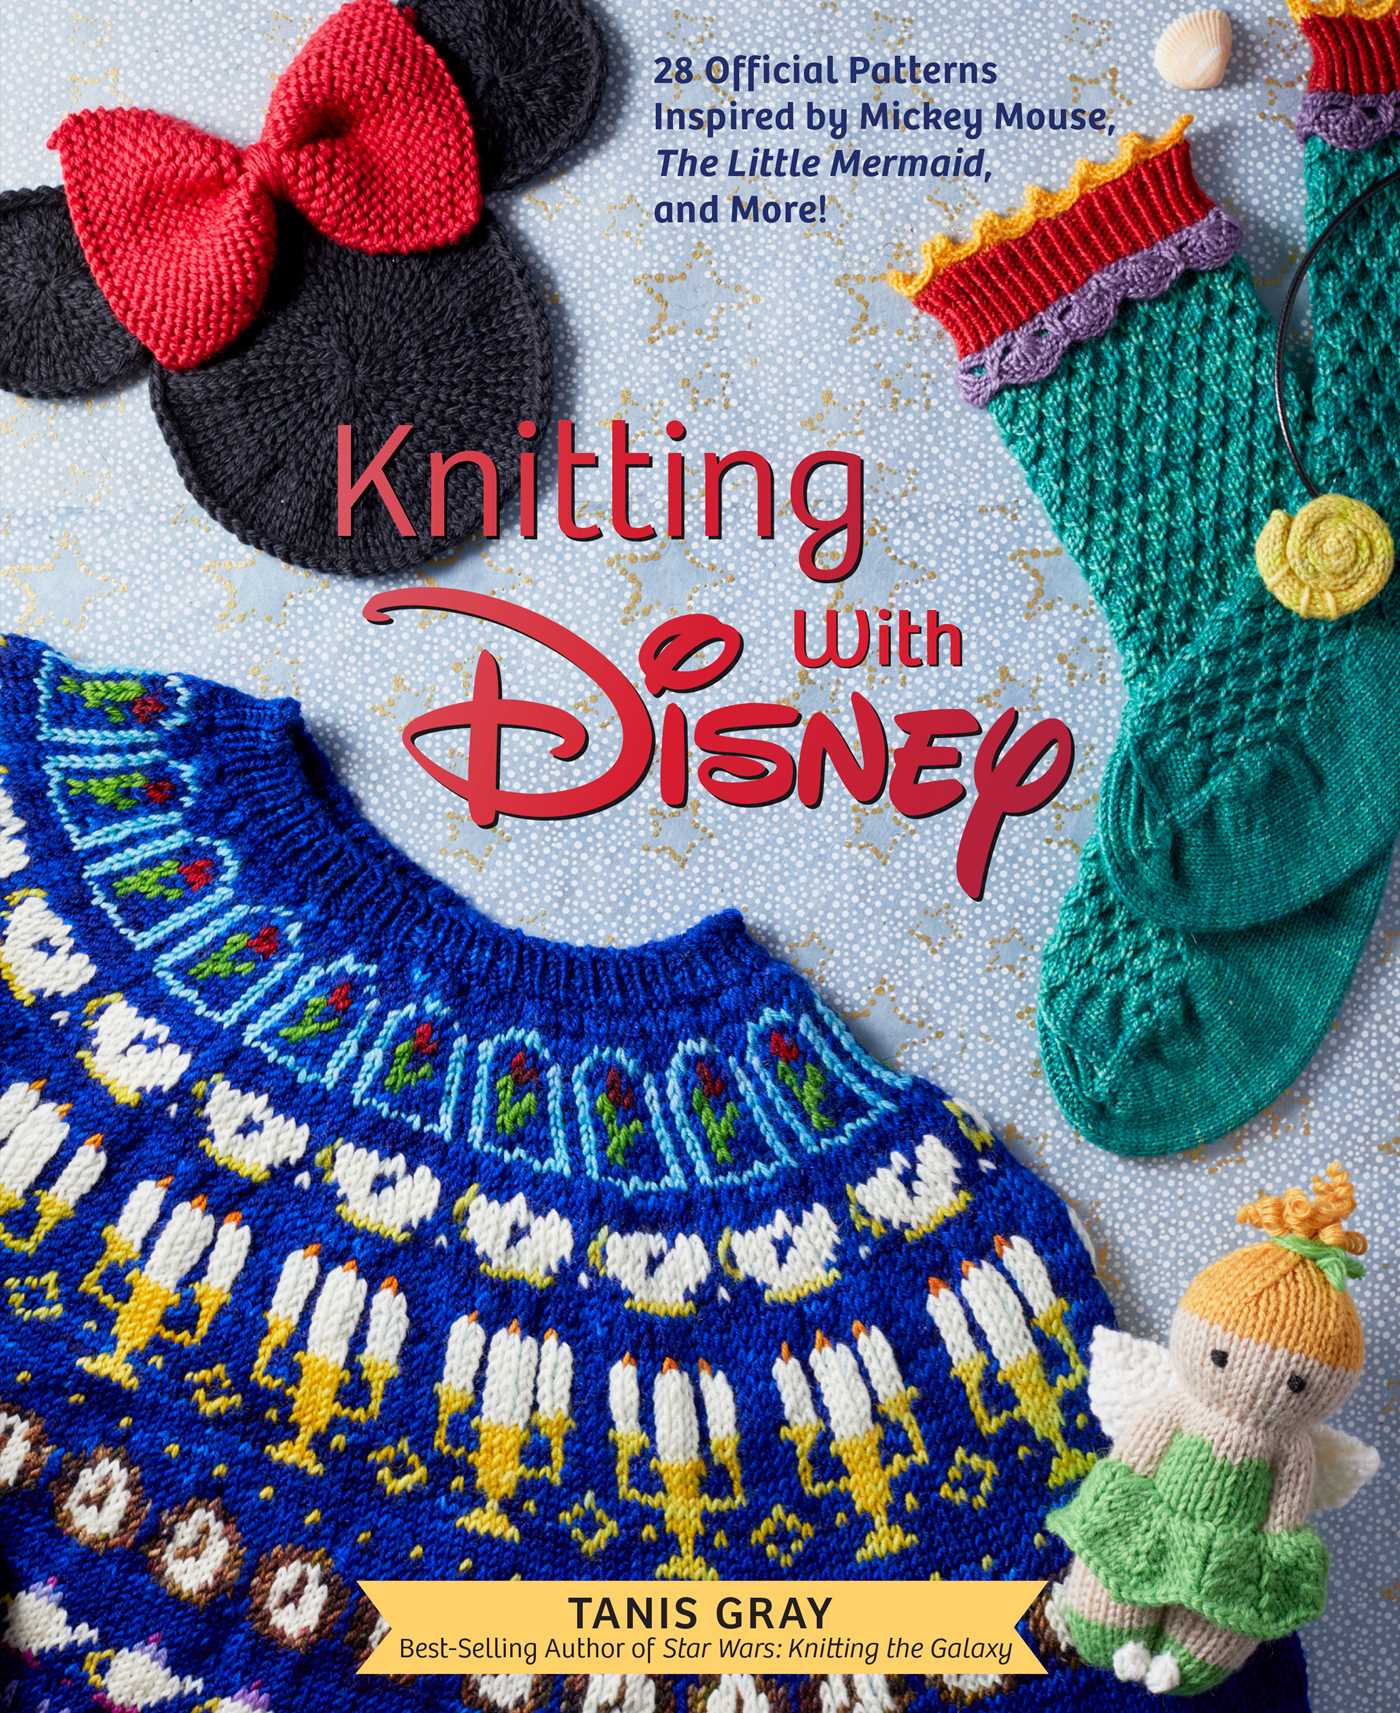 Knitting with Disney - Tanis Gray